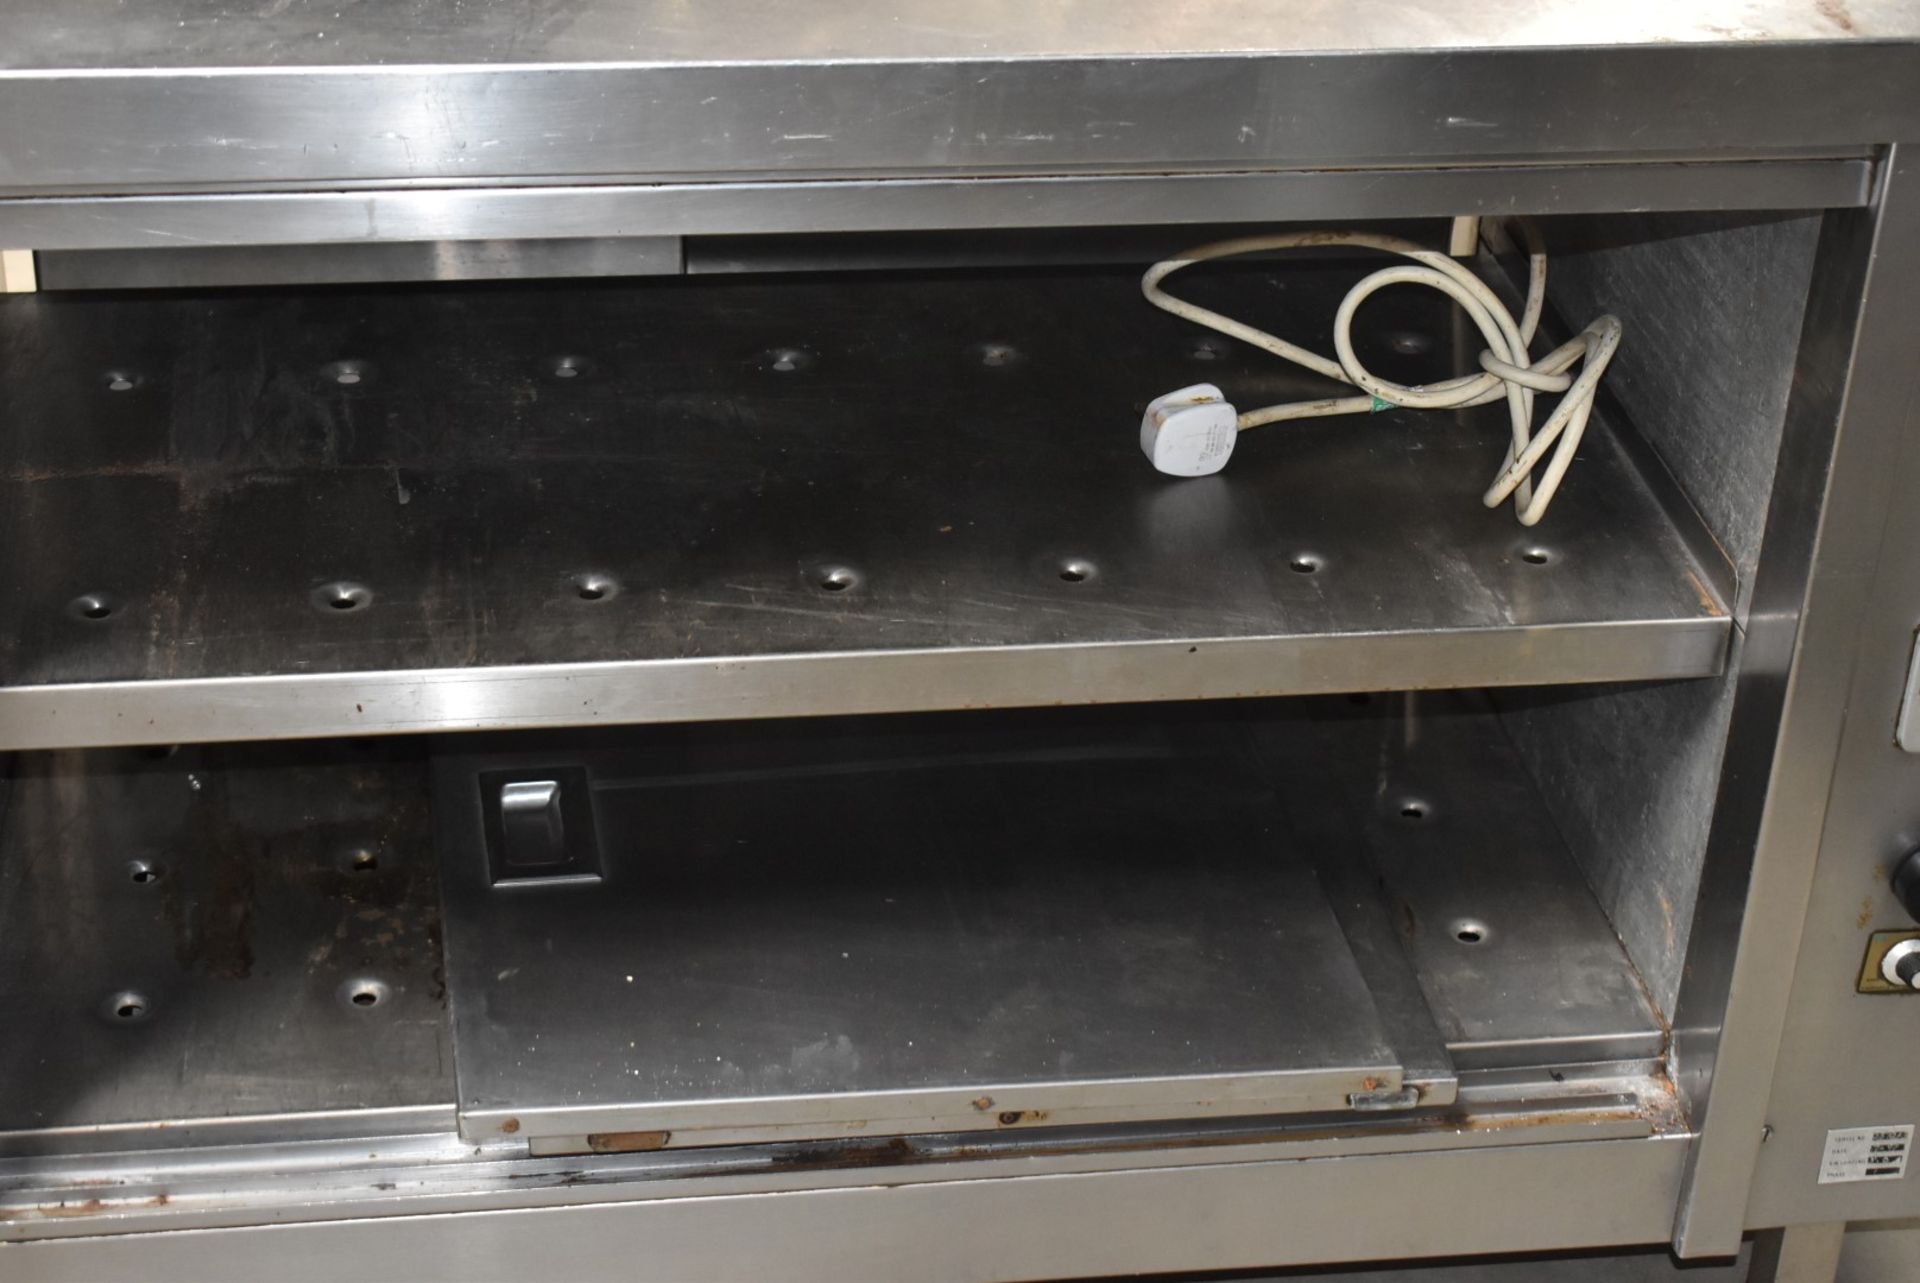 1 x Stainless Steel Hot Cabinet With Overhead Heated Passthrough Shelves and Order Ticket Rail - Image 6 of 11